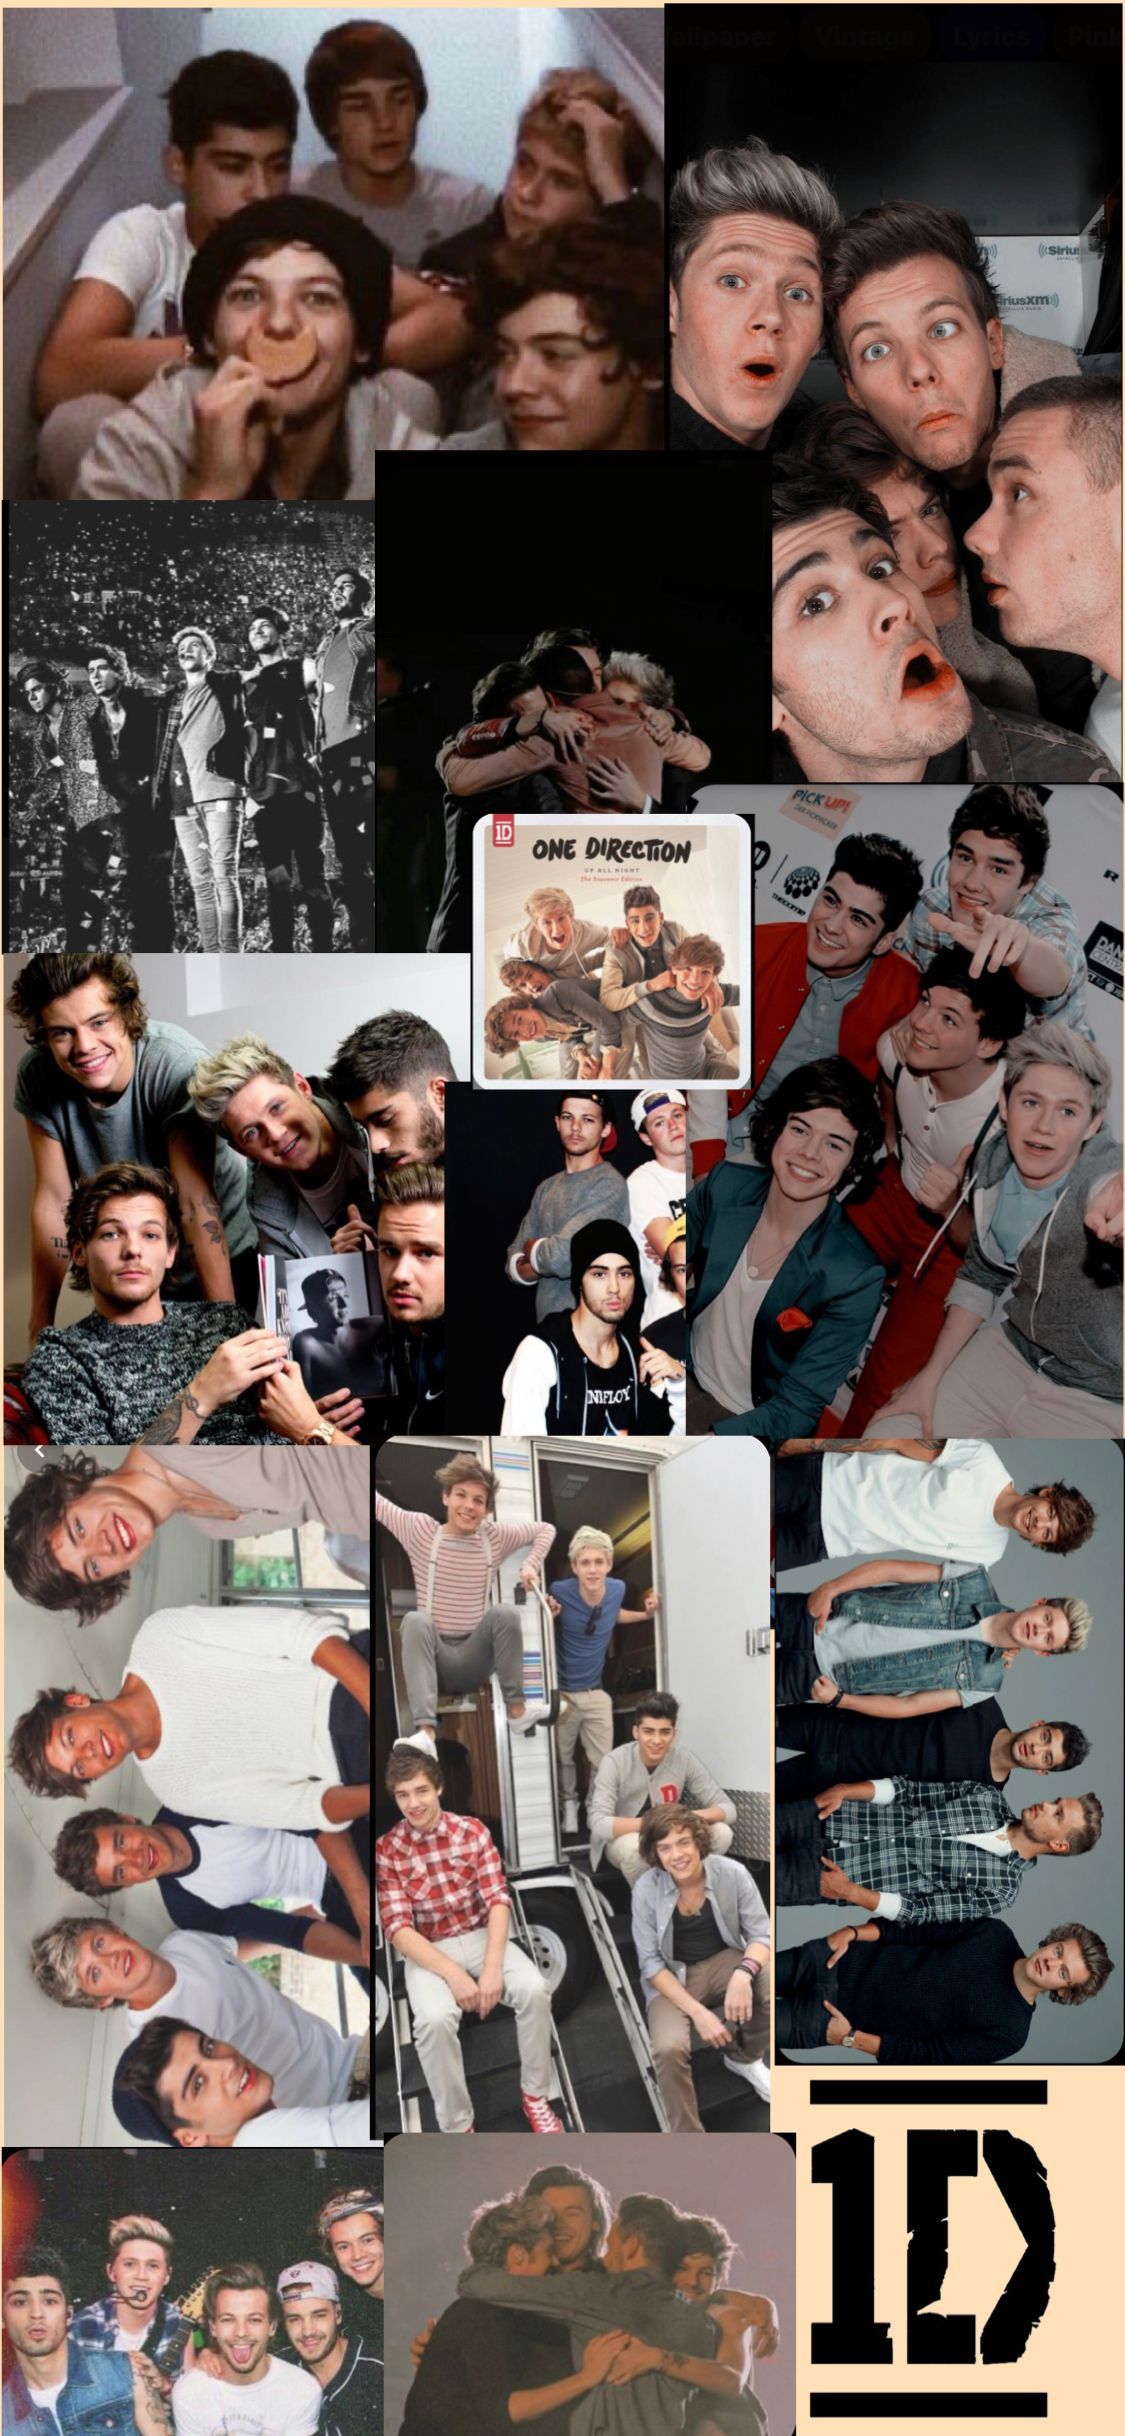 One Direction Wallpaper Collage. One direction wallpaper, One direction collage, One direction videos